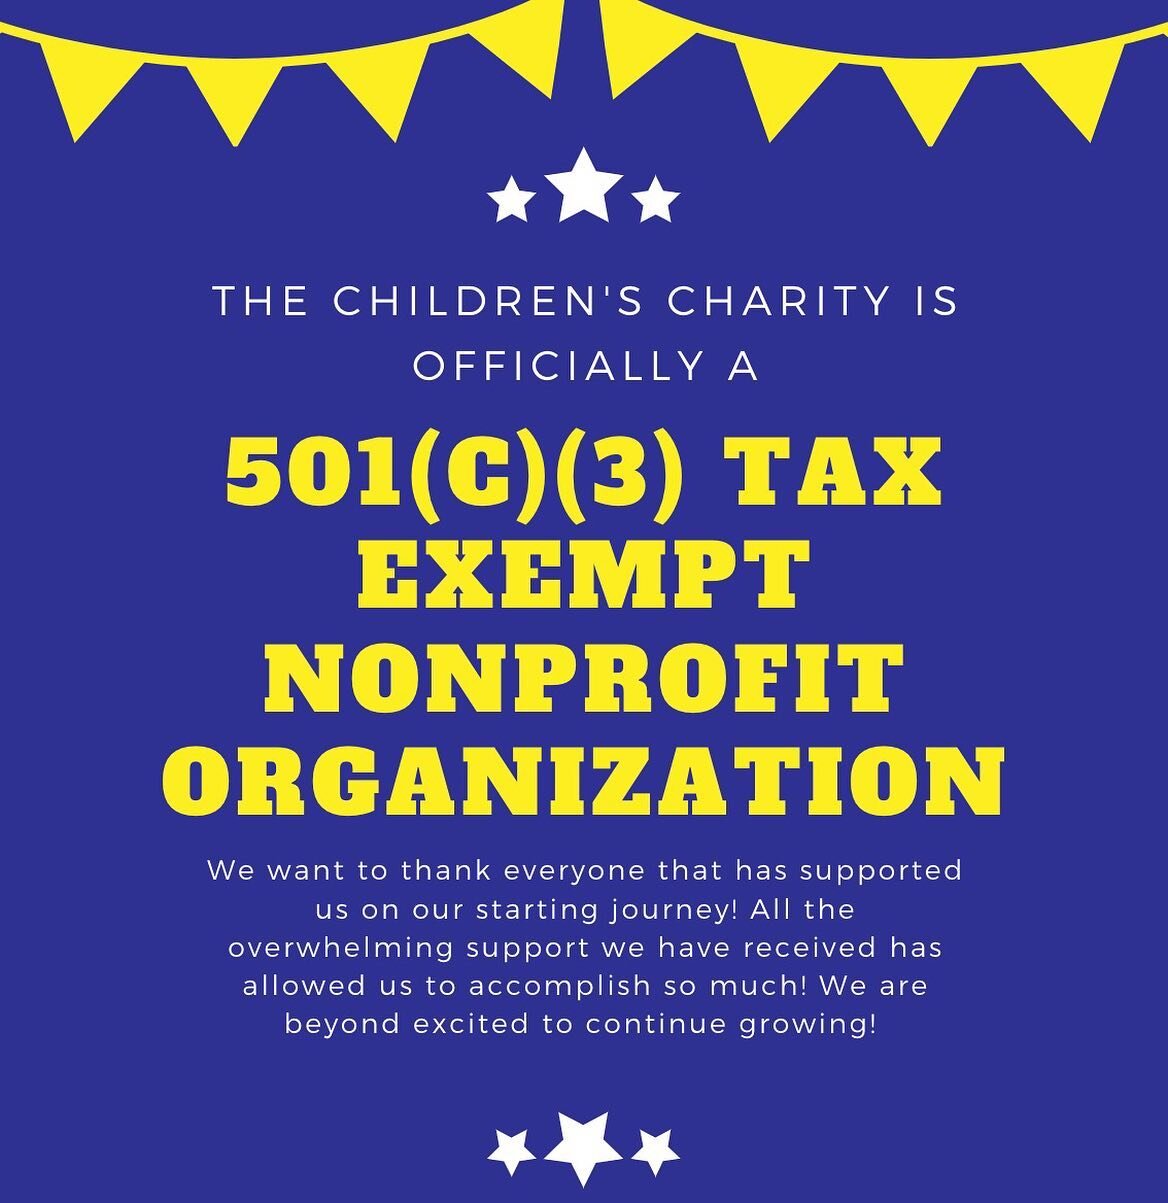 We are happy to share that The Children&rsquo;s Charity is now a 501(c)(3) tax exempt nonprofit organization. Thank you to all our supporters!! With this new status, we hope to continue growing and bringing joy and relief to ill children everywhere. 